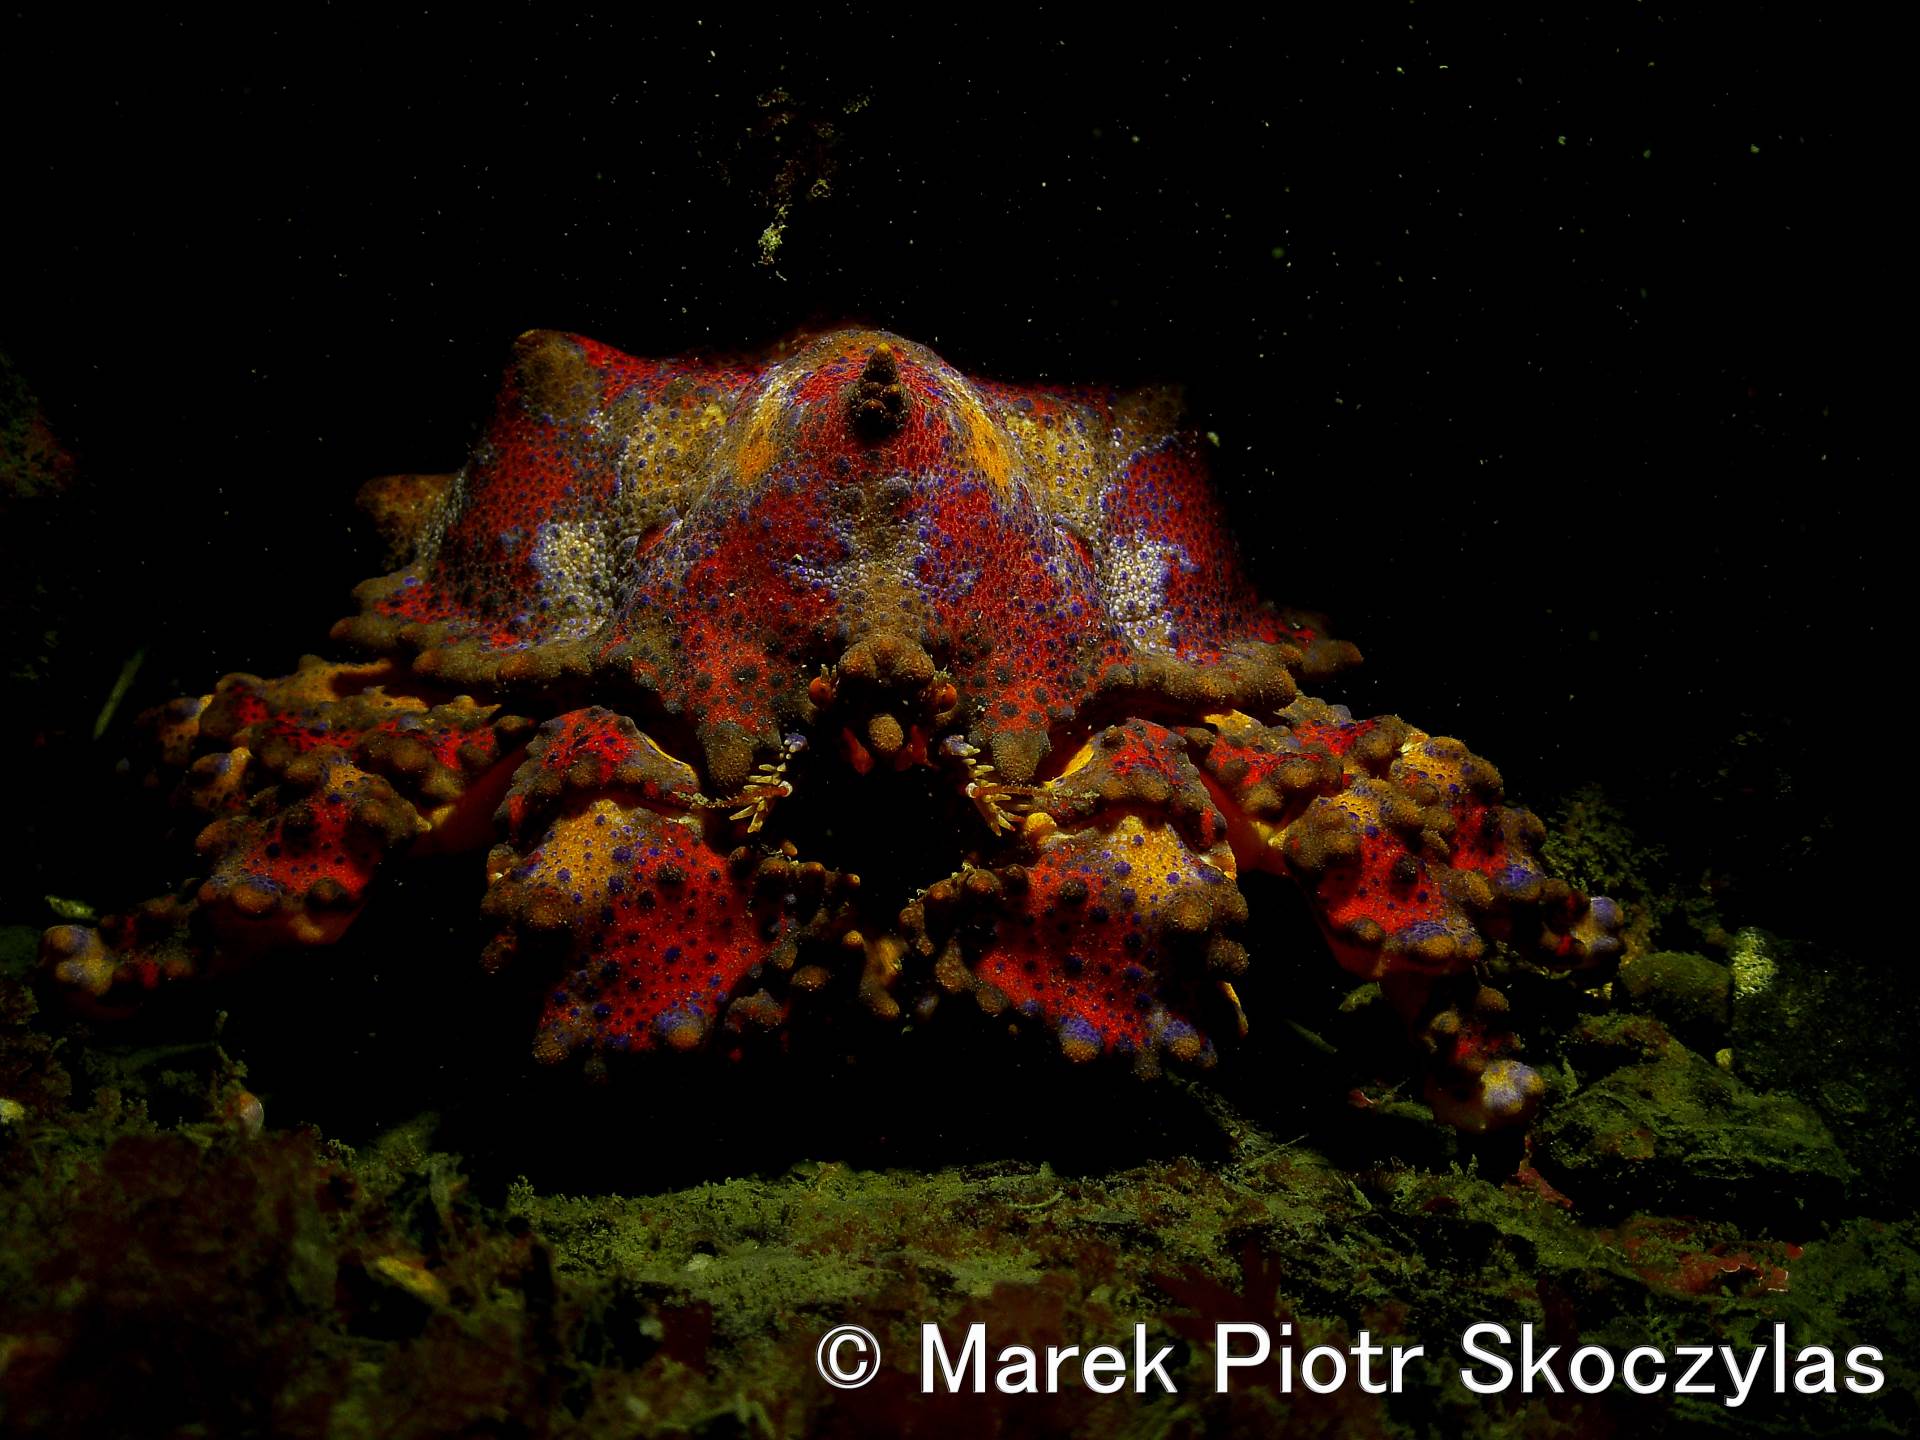 I recently started publishing on-line my over 44 thousand picture database of Puget Sound Critters organized by Species.
The work has just begun. Flatfish & Rockfish part is completed plus some selected critters like Pacific Spiny Lumpsuckers (Little Cuties) and Puget Sound King Crabs.
This work will continue at least for 1 year. Estimated completion Q1 2017.
Here is the site:
https://mareksk.smugmug.com/